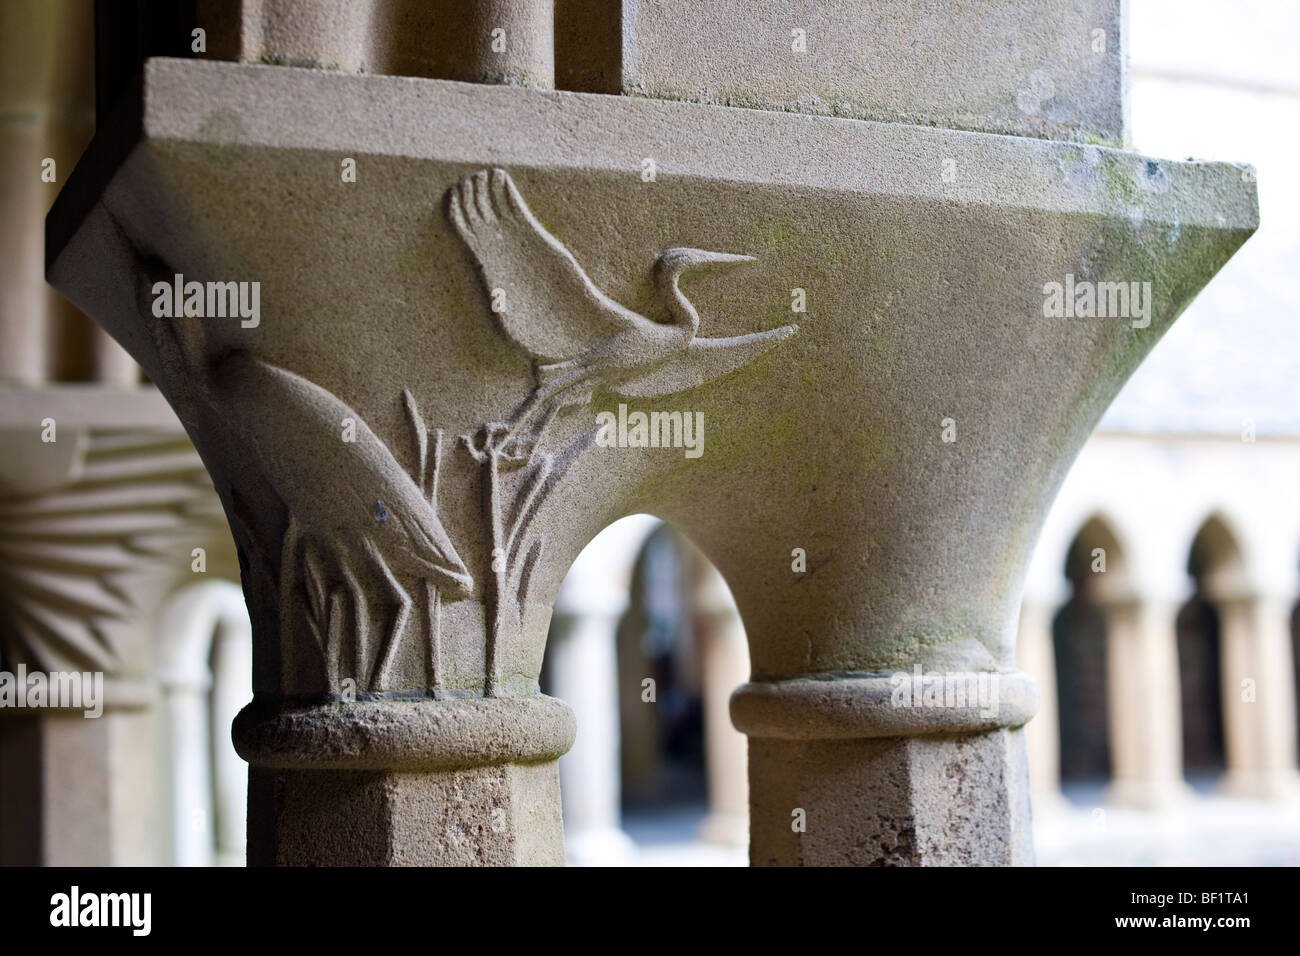 The cloisters and stone carvings of Iona Abbey on the Isle of Iona, Scotland Stock Photo